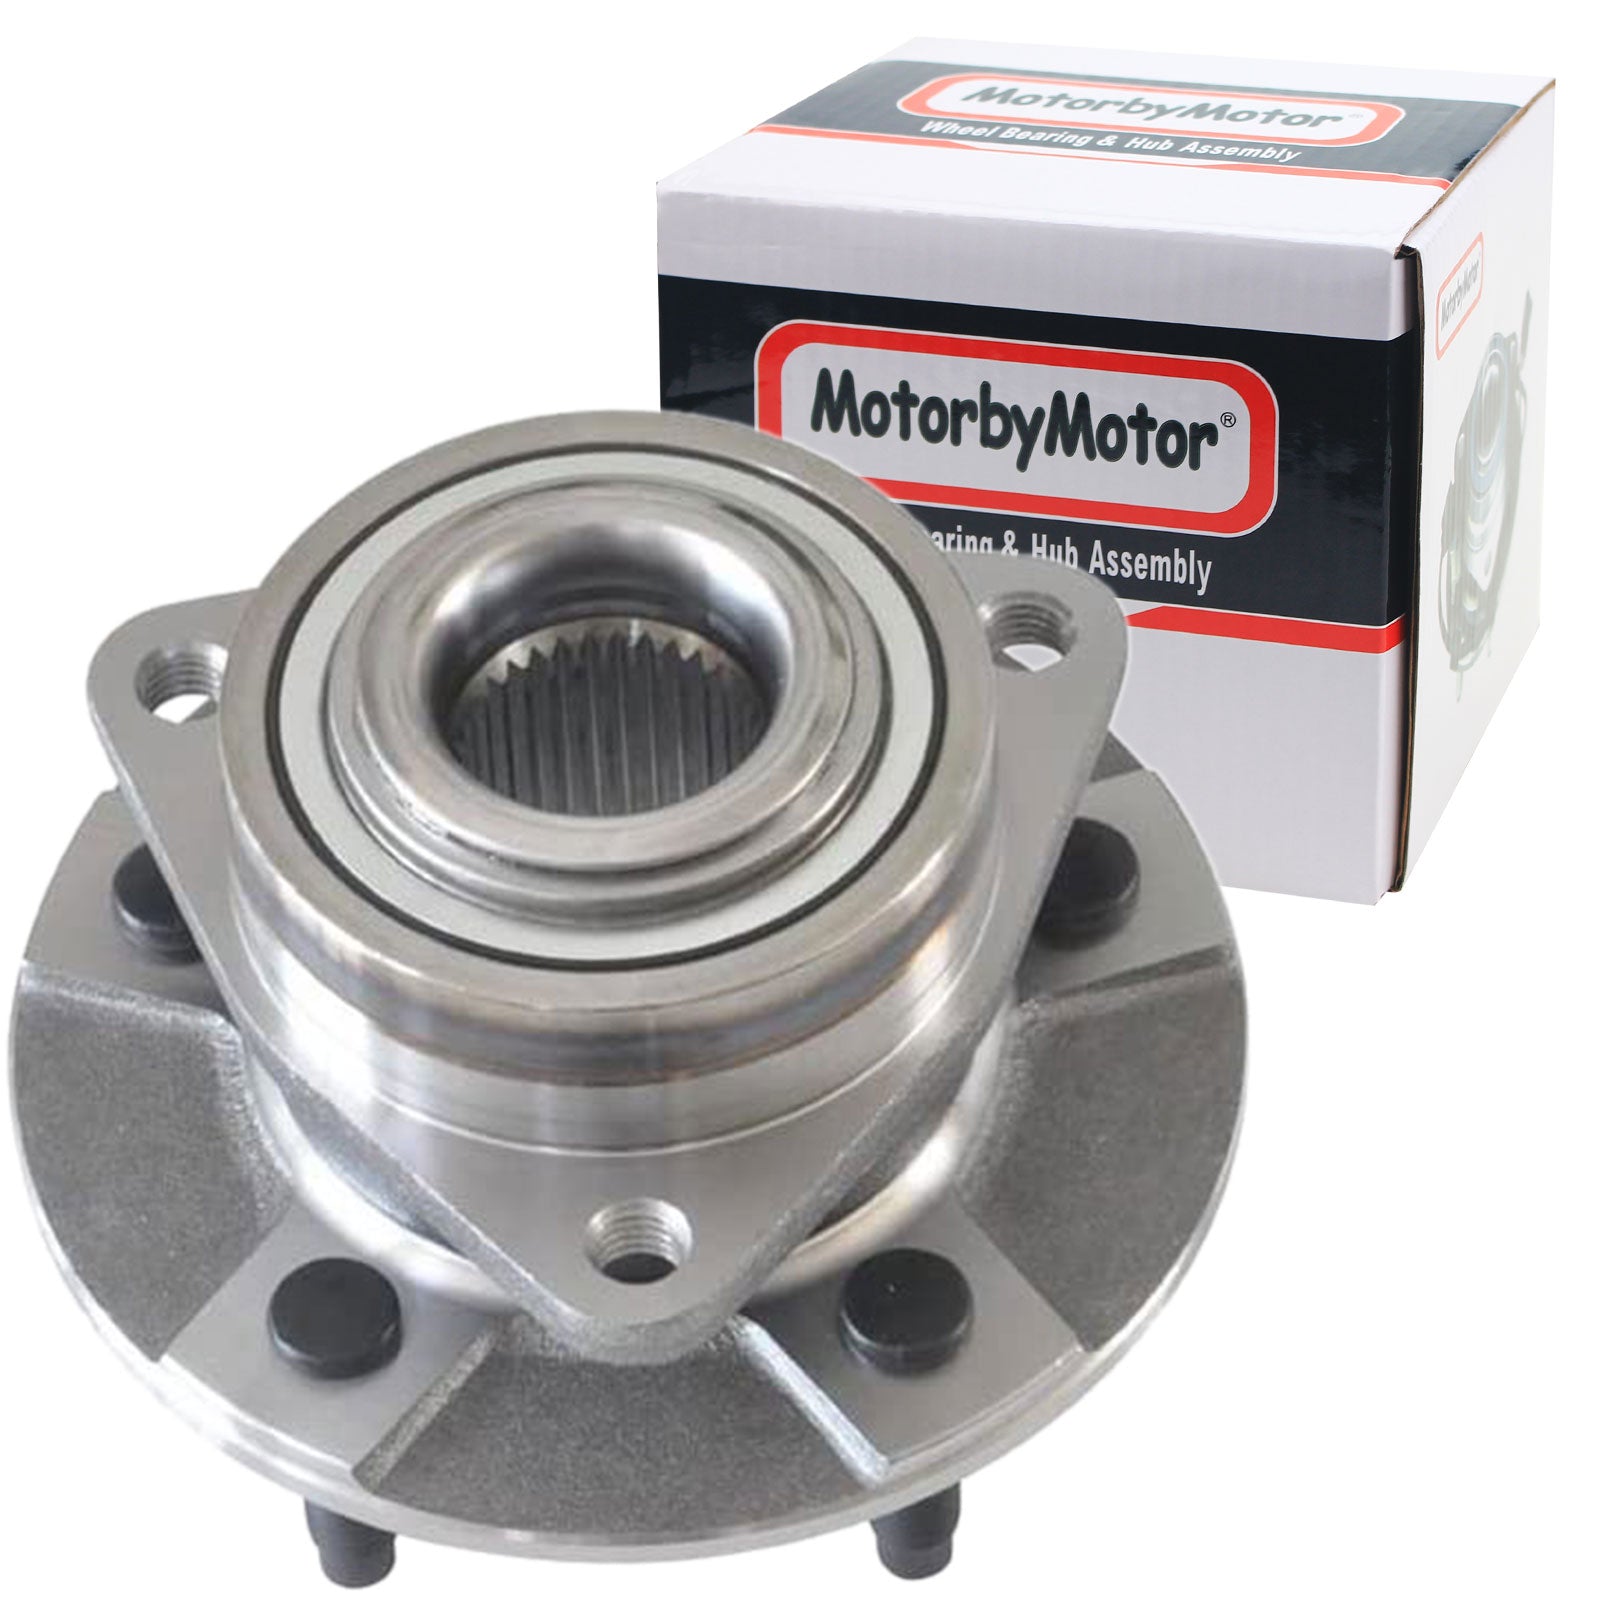 MotorbyMotor 513190 Front Wheel Bearing and Hub Assembly w/5 Lugs Fits for Chevy Equinox, Saturn Vue, Pontiac Torrent Low-Runout OE Directly Replacement Hub Bearing MotorbyMotor